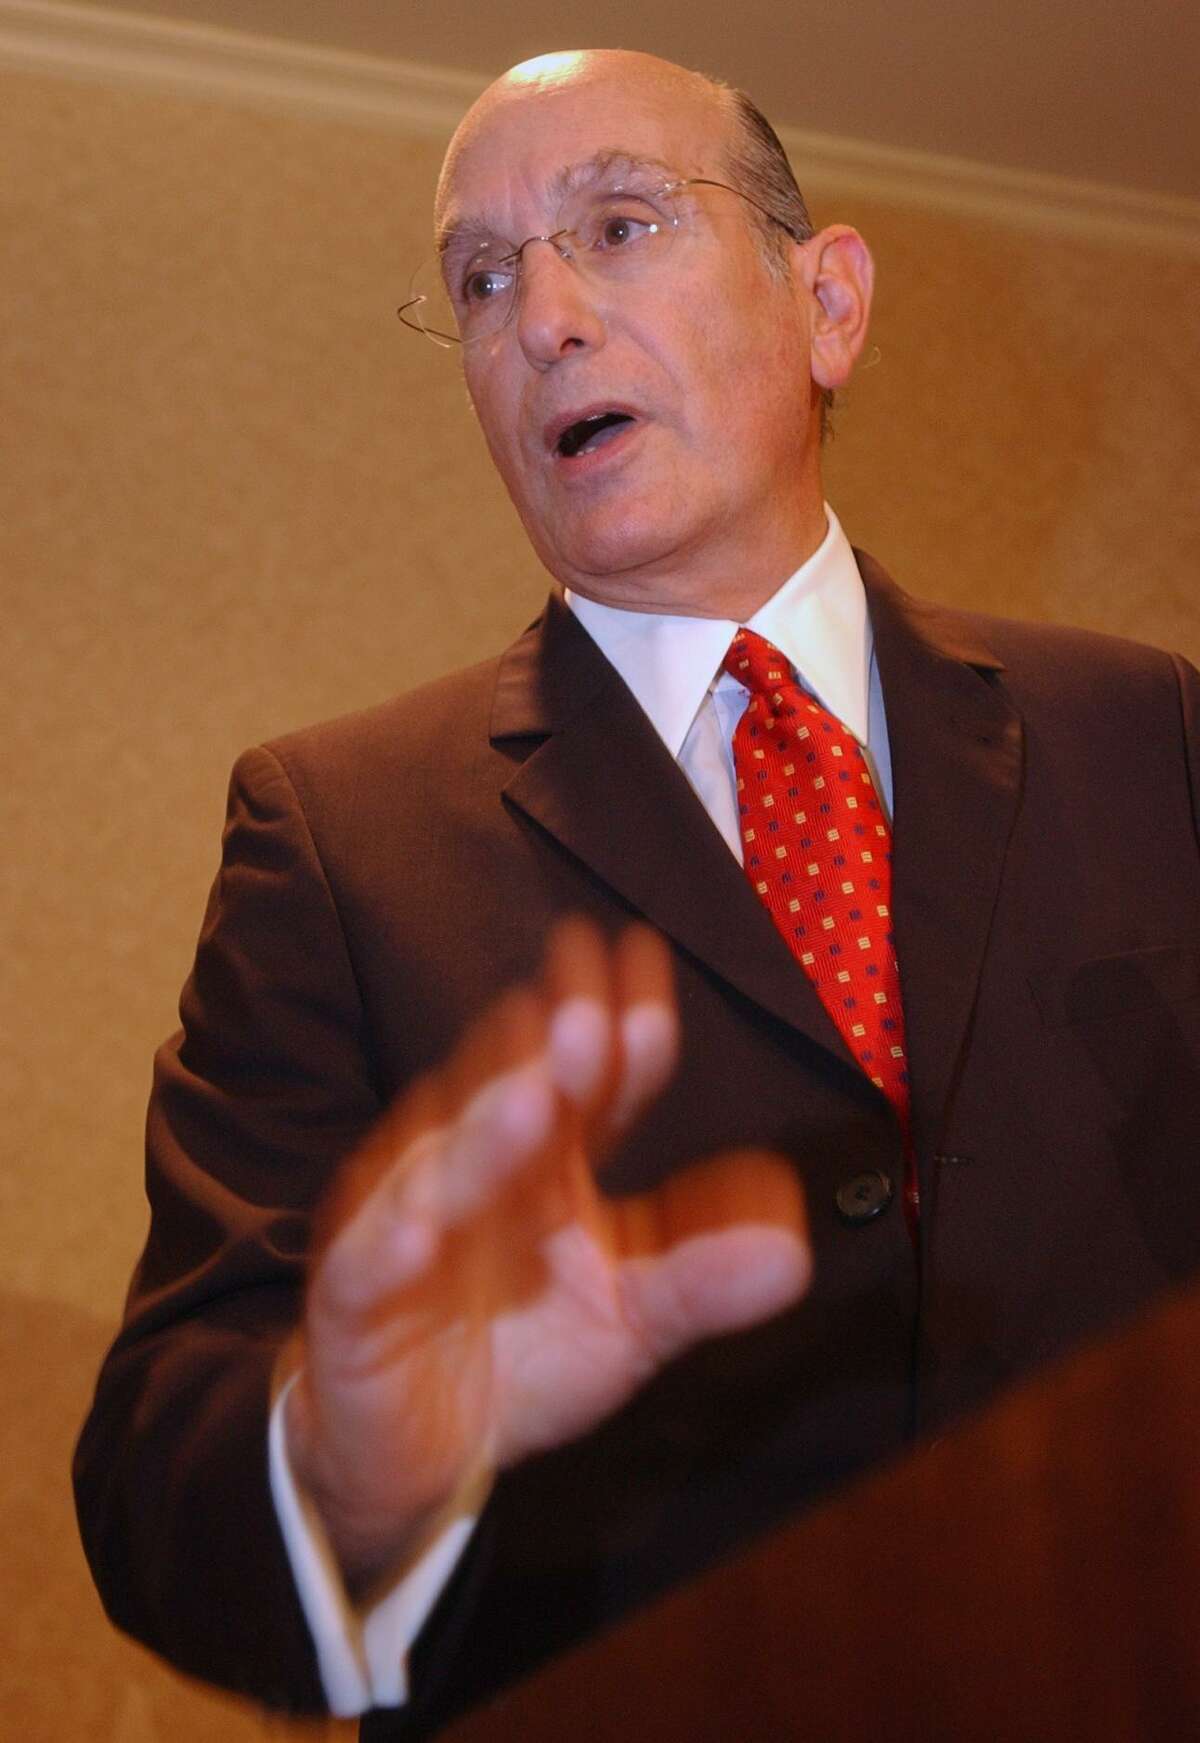 Attorney Richard Bieder of Koskoff, Koskoff & Bieder of Bridgeport, during a 2002 press conference after he and other attorneys representing 70 Connecticut municipalities filed a class action lawsuit in Hartford Superior Court seeking to recover more than $220 million lost when a loan to Enron went bad.